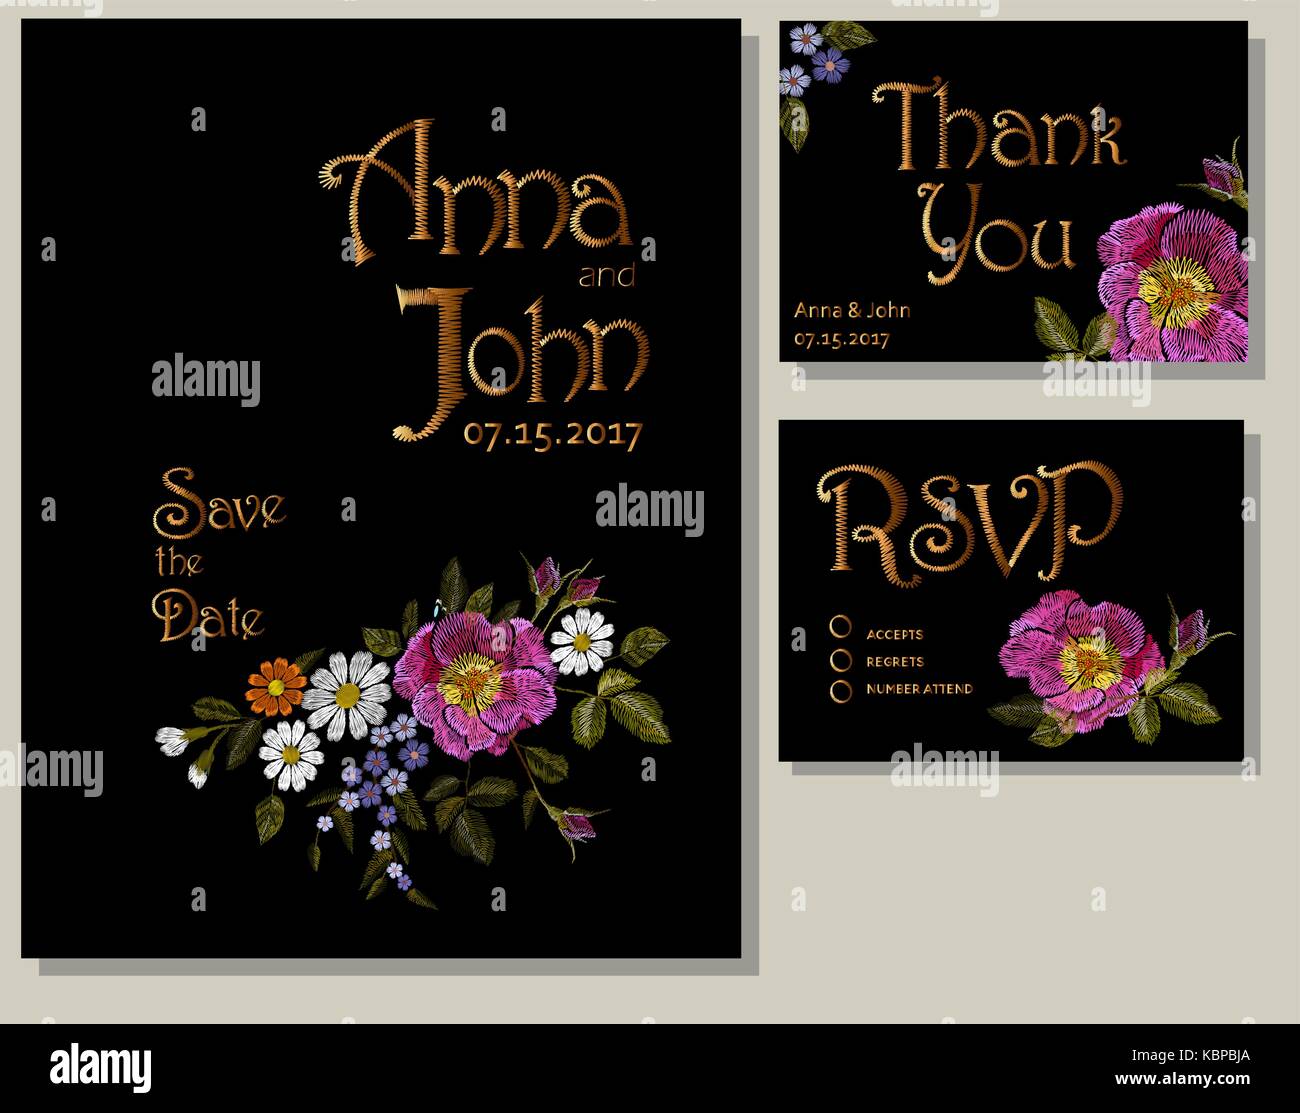 Floral wedding cards design suite template. Rustic field flower wild rose daisy gerbera herbs. Save the date greeting card RSVP thank you. Embroidery  Stock Vector